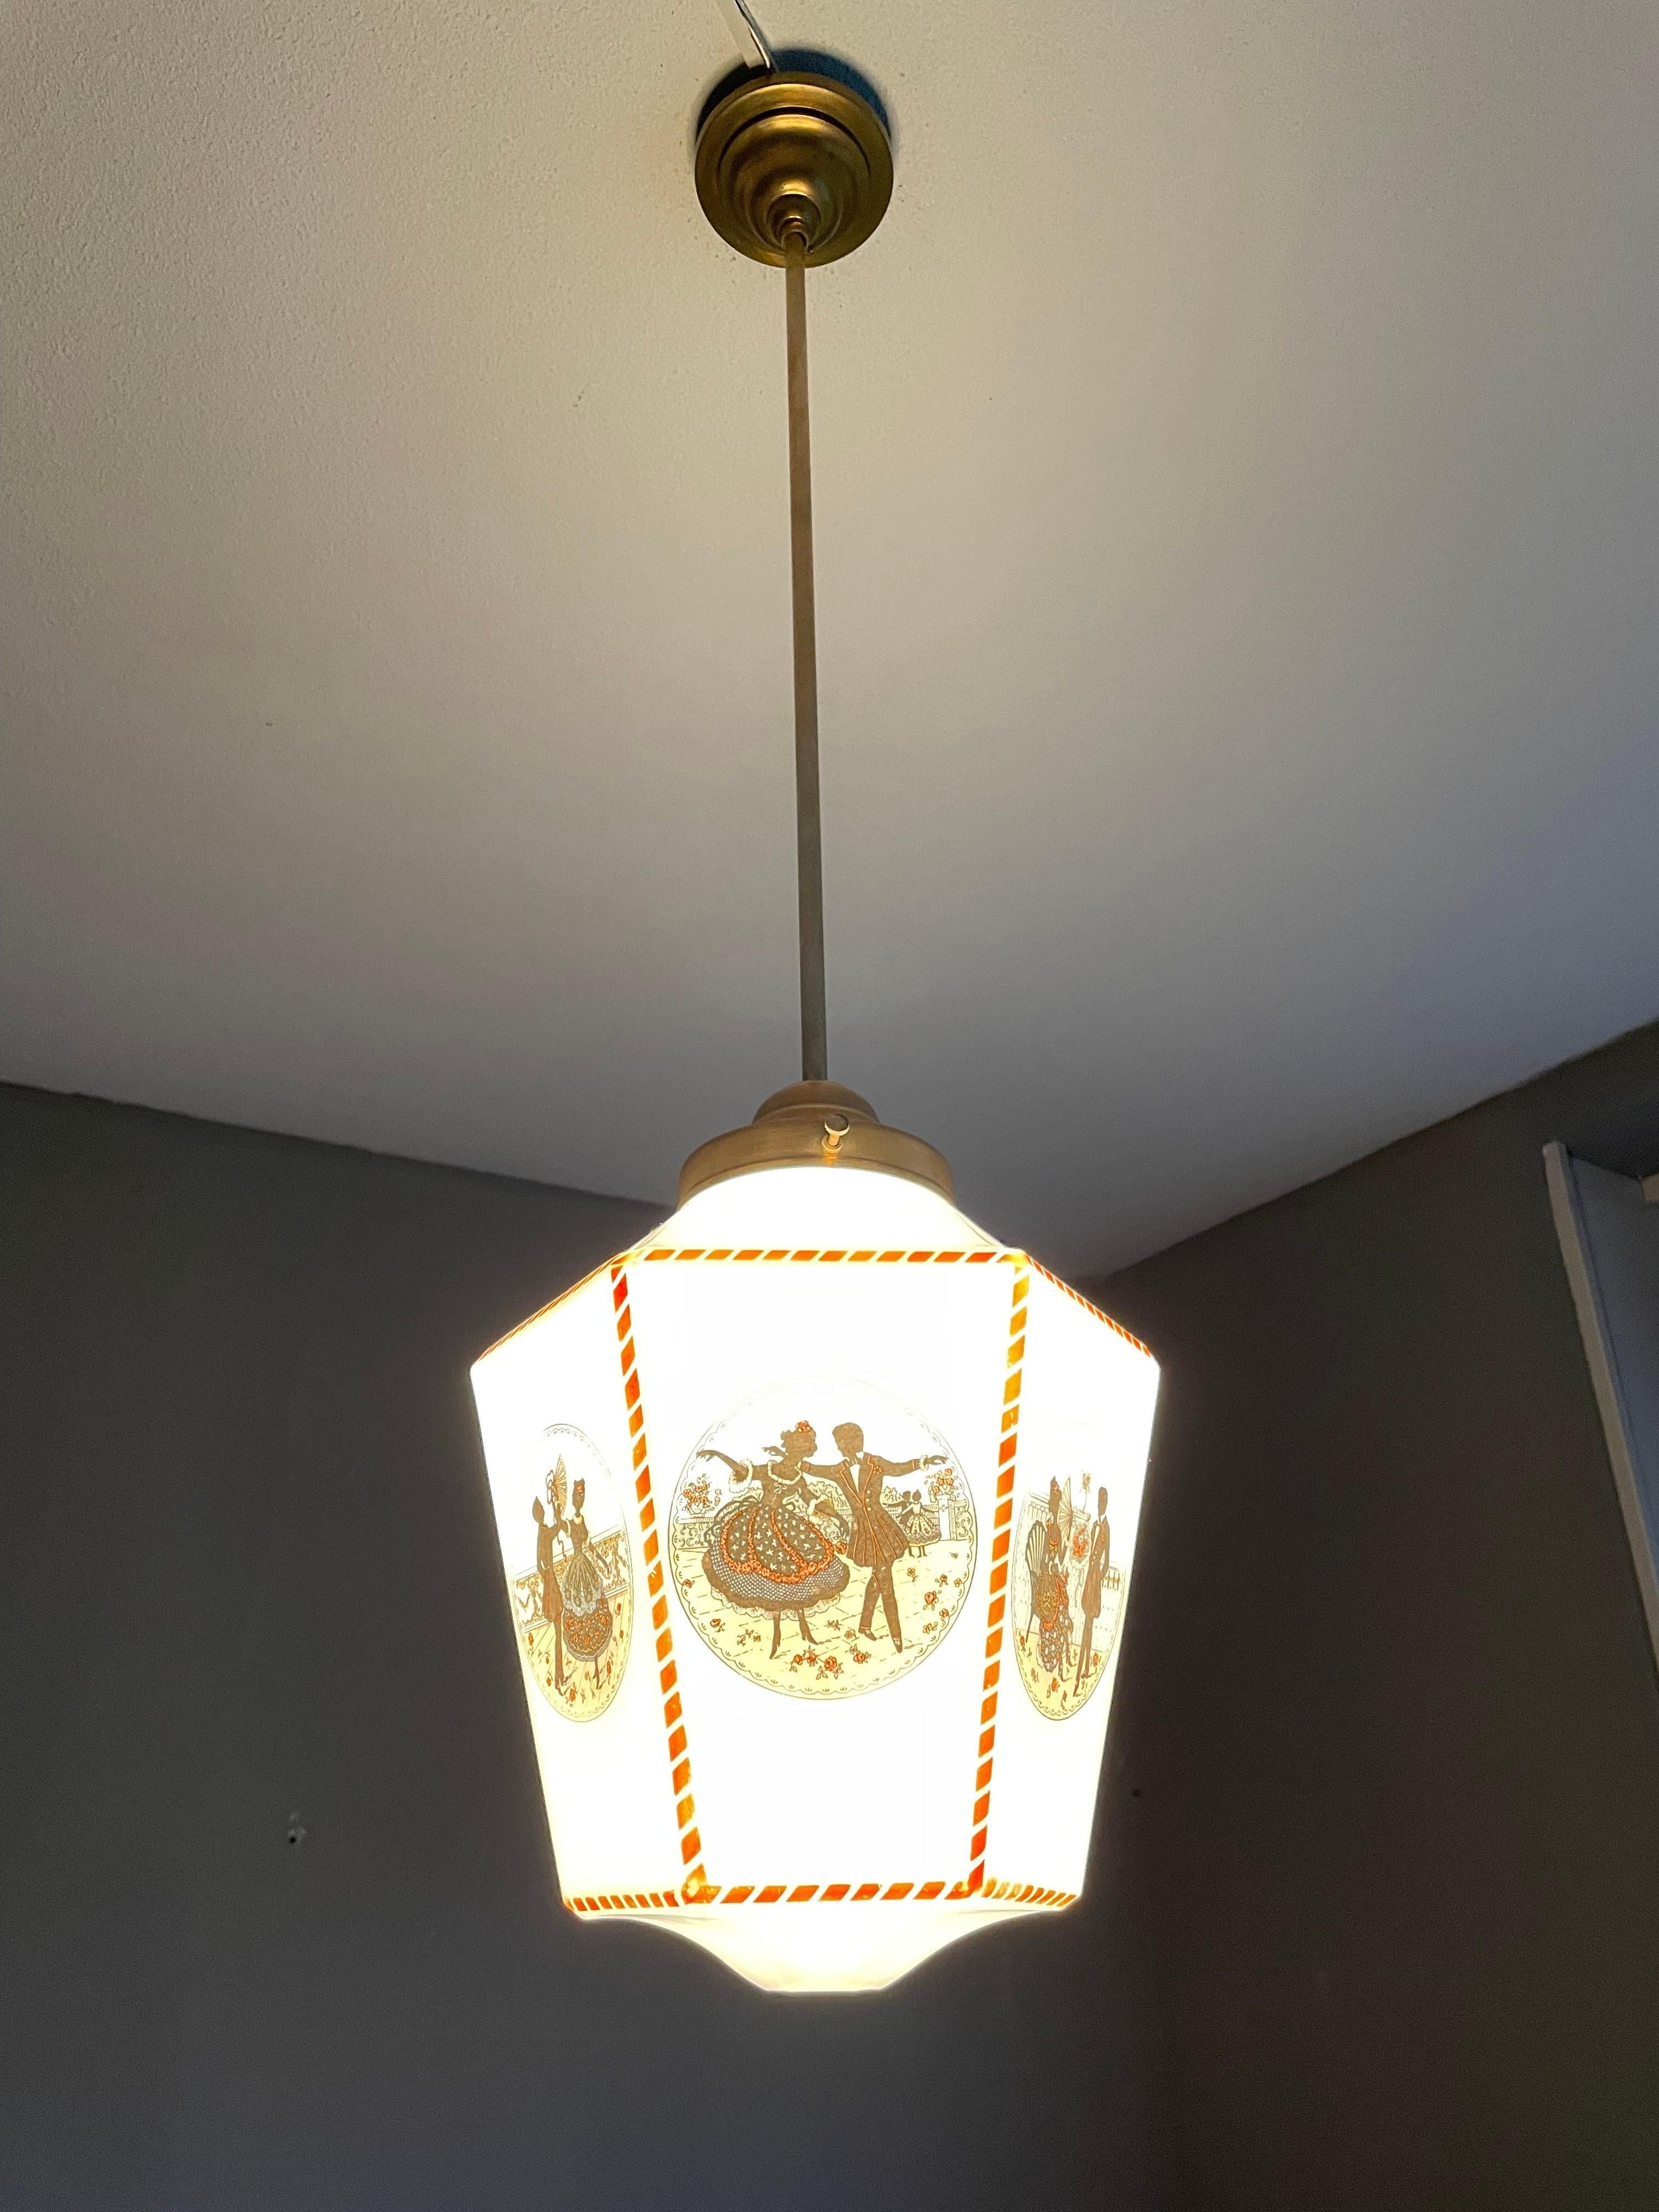 Hexagonal design, early 1900s pendant with colorful, silhouette style Victorian graphics.

If you are looking for a rare, beautifully designed and finely decorated pendant to grace your entrance, landing or perhaps your bedroom then this Victorian